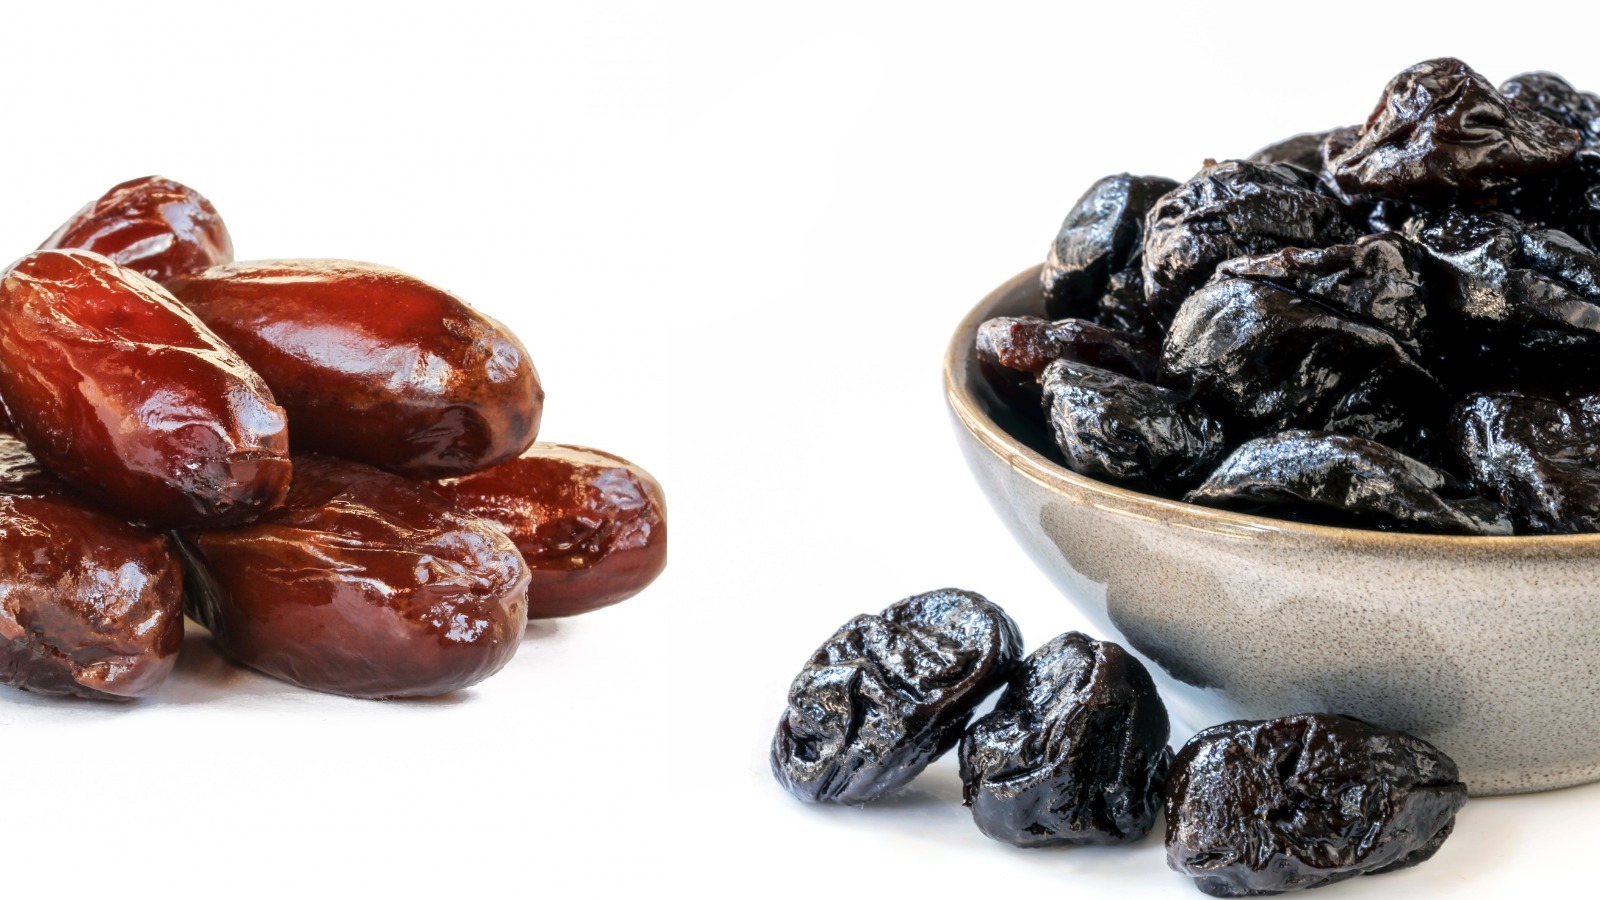 Prunes Vs. Plums: How Are They Different?